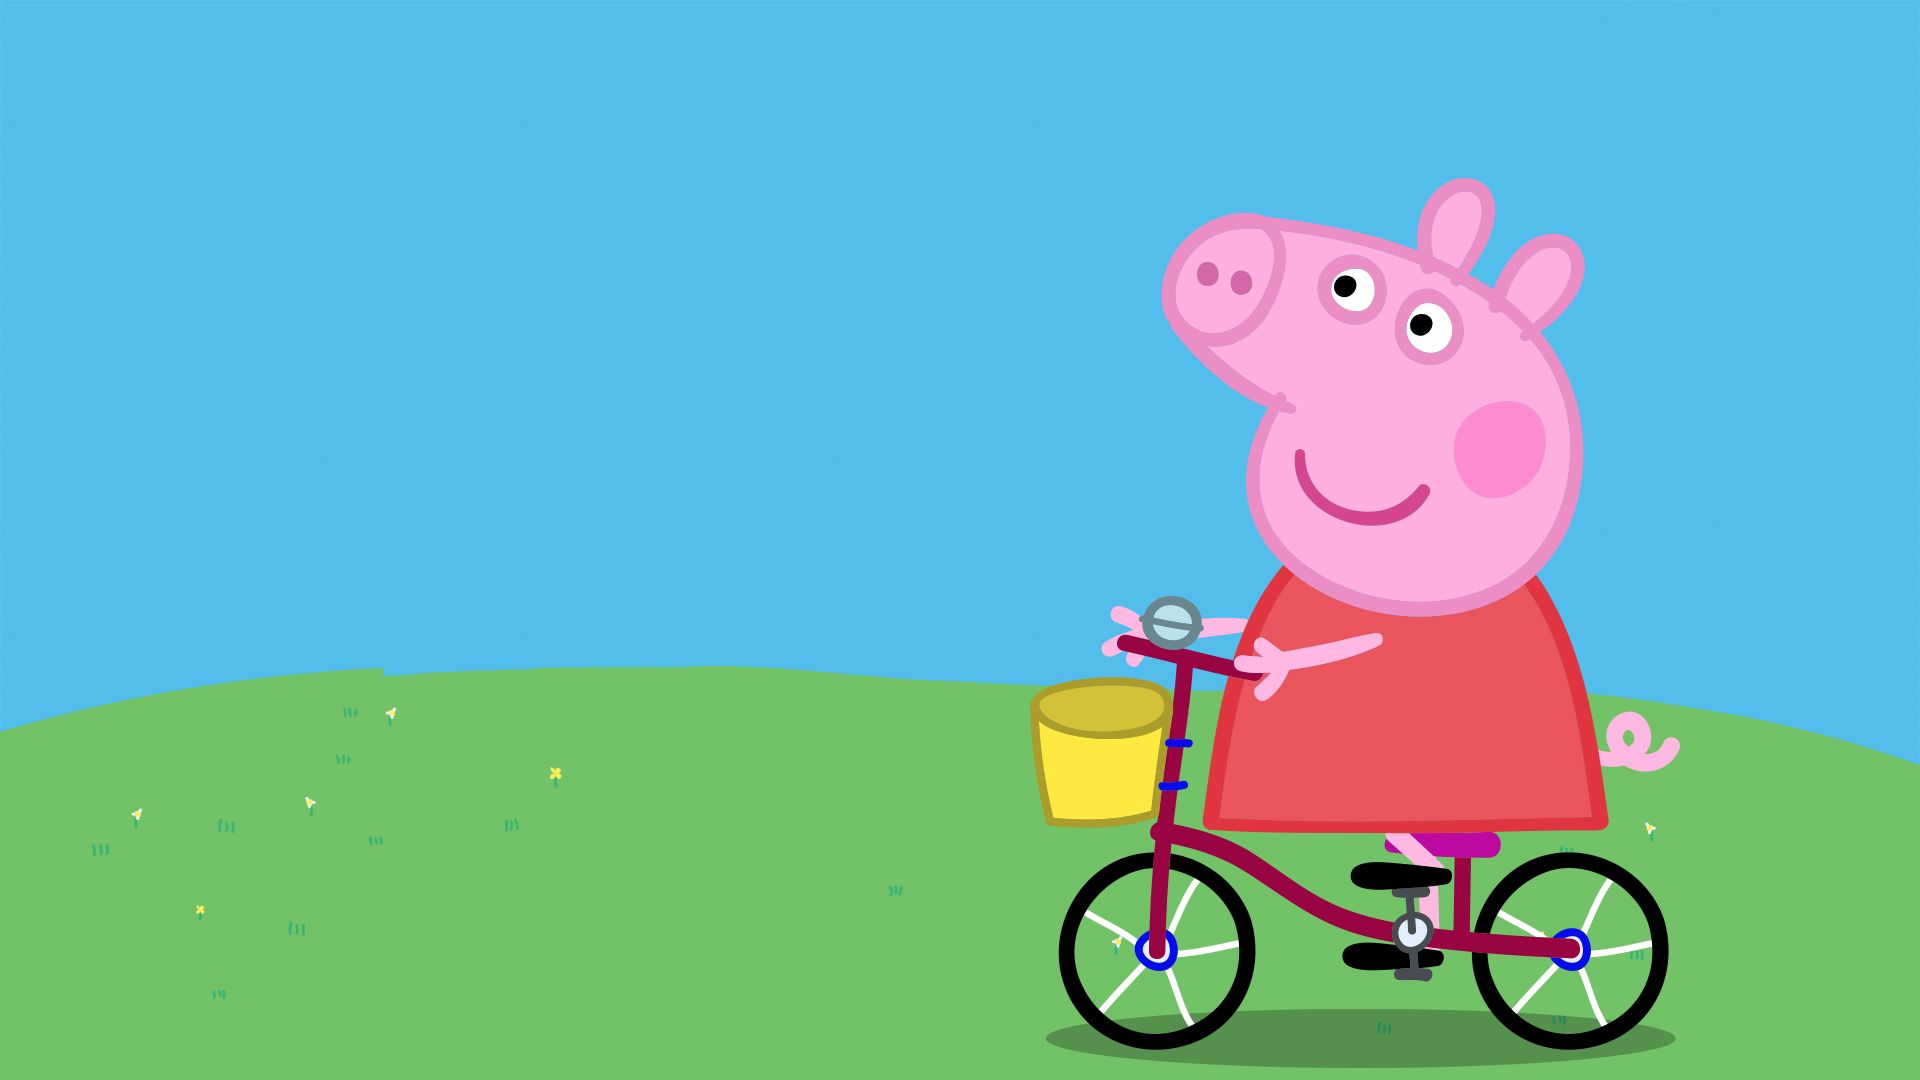 Peppa Pig House HD Wallpapers - Wallpaper Cave